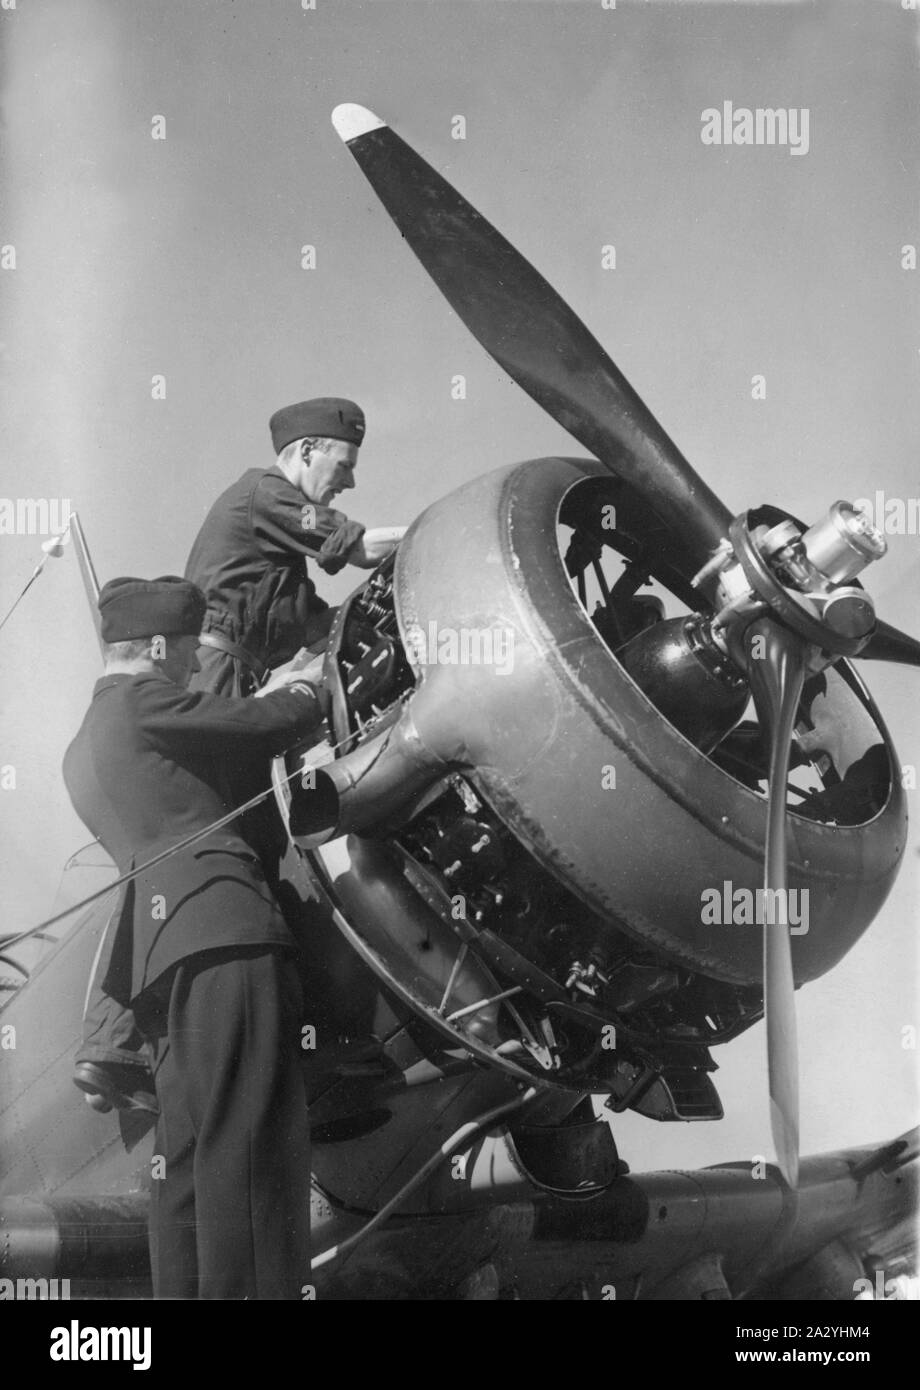 Airplane engineers.Three mechanics are performing the important last minute check of engine details before start. The airplane is a swedish single propeller engine light bomb and survaillance unit model B5. The swedish company Saab Svenska Aeroplan AB produced this airplane on license from American Northrop and their model 8A-1.  Picture taken in the 1940s during the second world war. Stock Photo